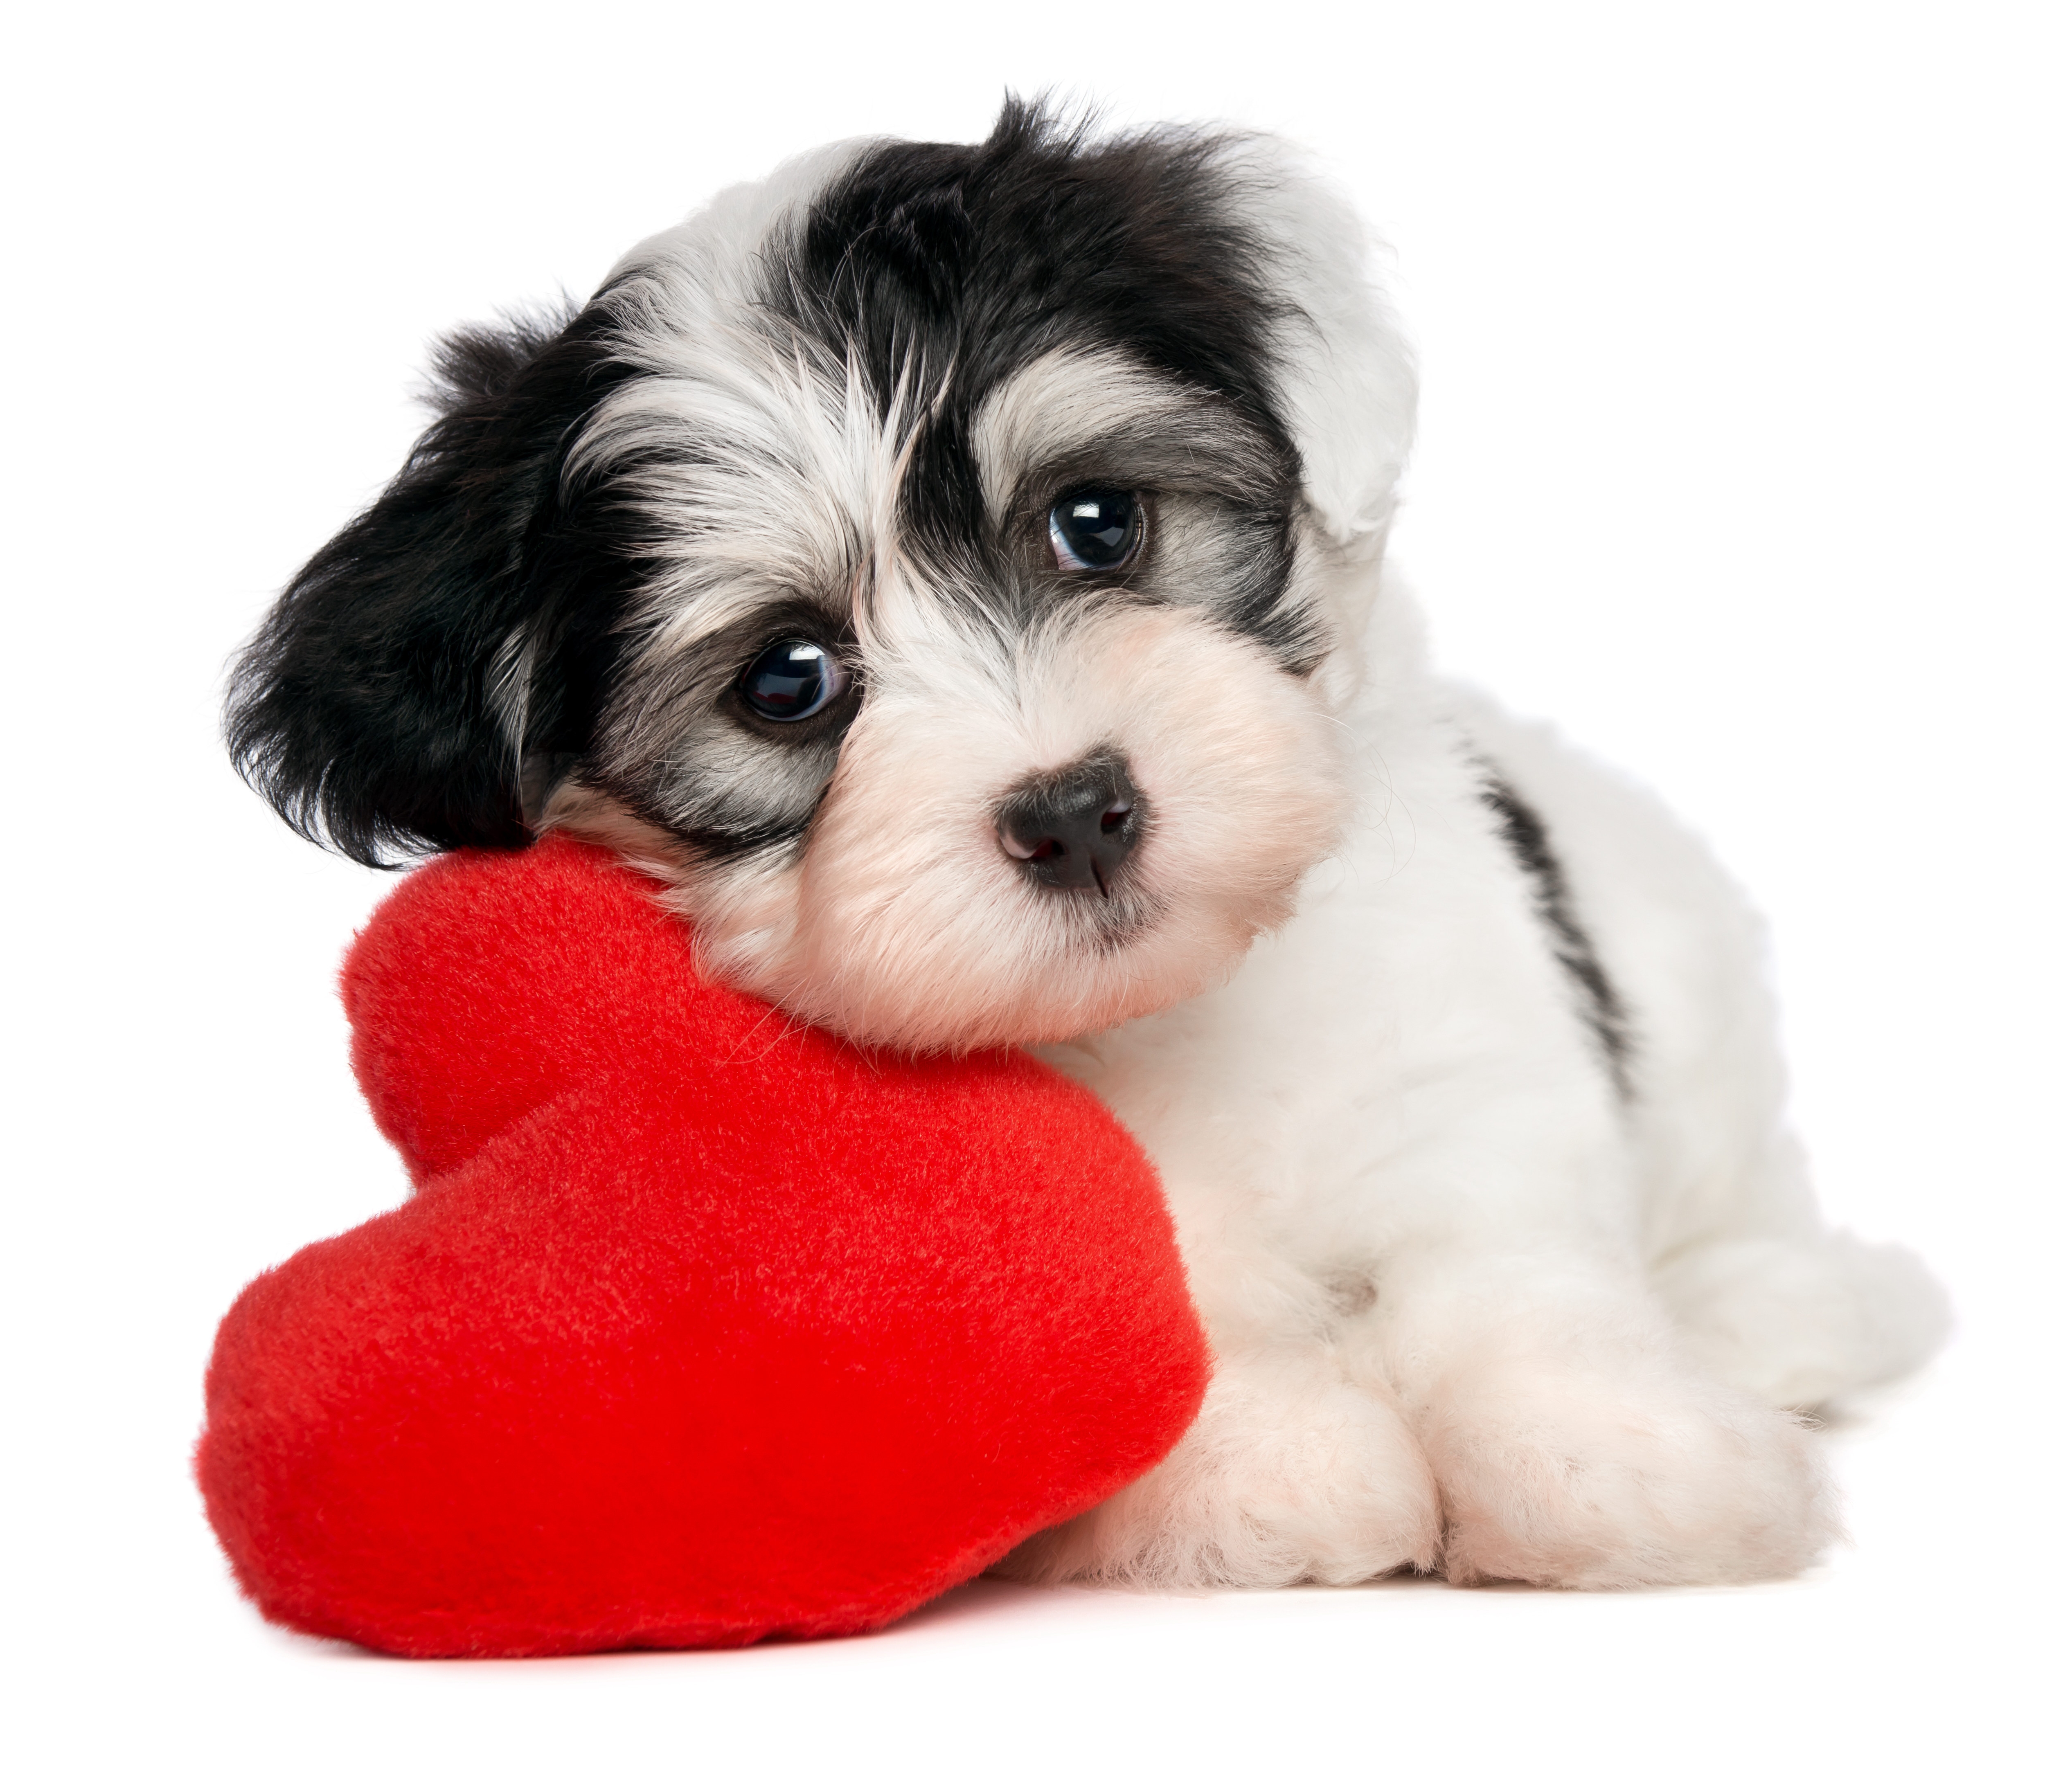 A puppy with a red heart